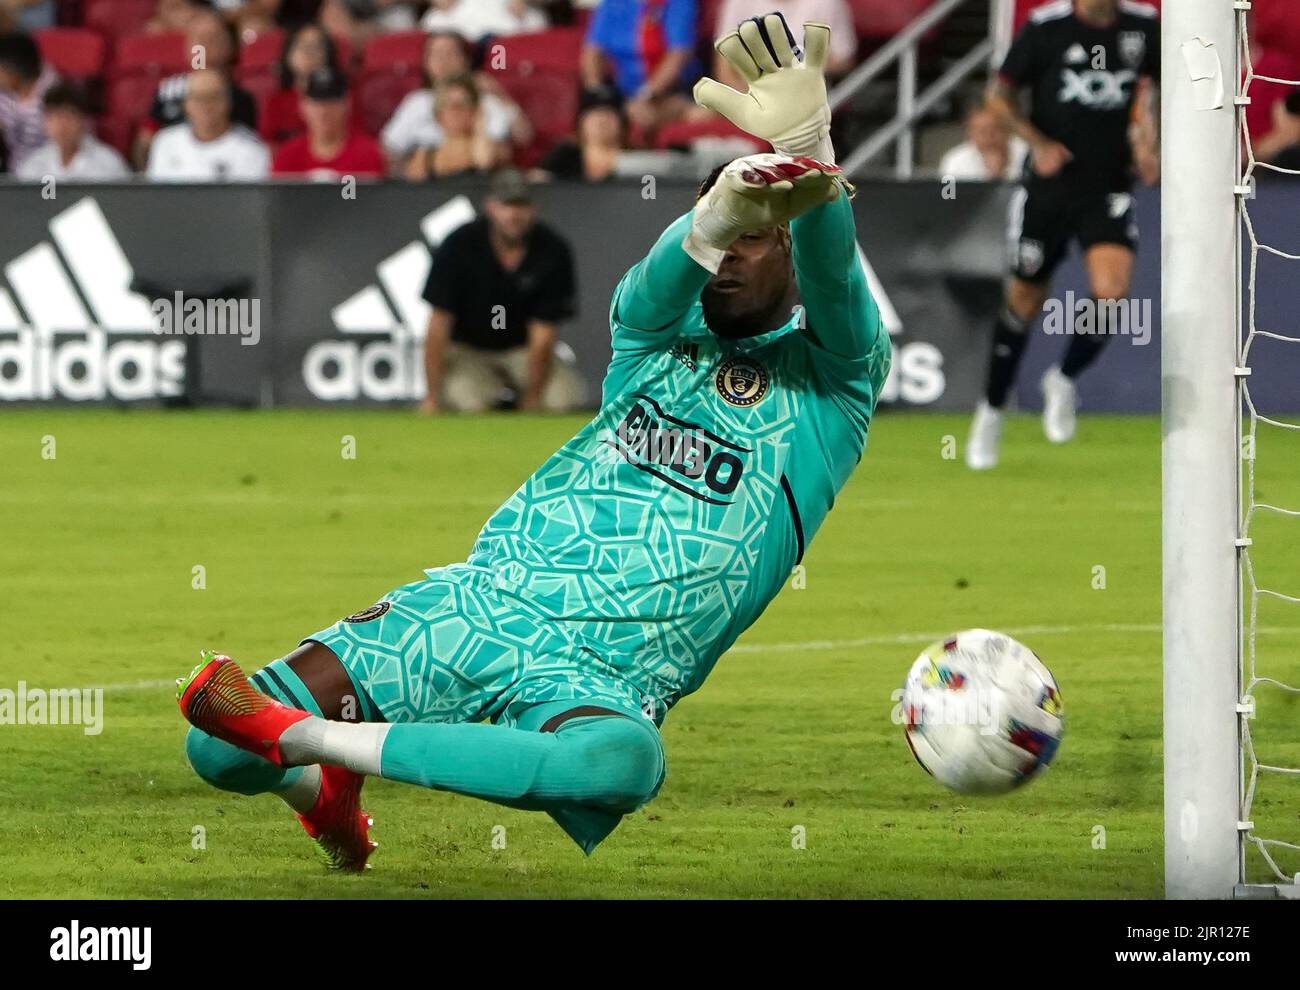 WASHINGTON, DC, USA - 20 AUGUST 2022: Philadelphia Union goalkeeper Andre Blake (18) makes a save during a MLS match between D.C United and the Philadelphia Union on August 20, 2022, at Audi Field, in Washington, DC. (Photo by Tony Quinn-Alamy Live News) Stock Photo